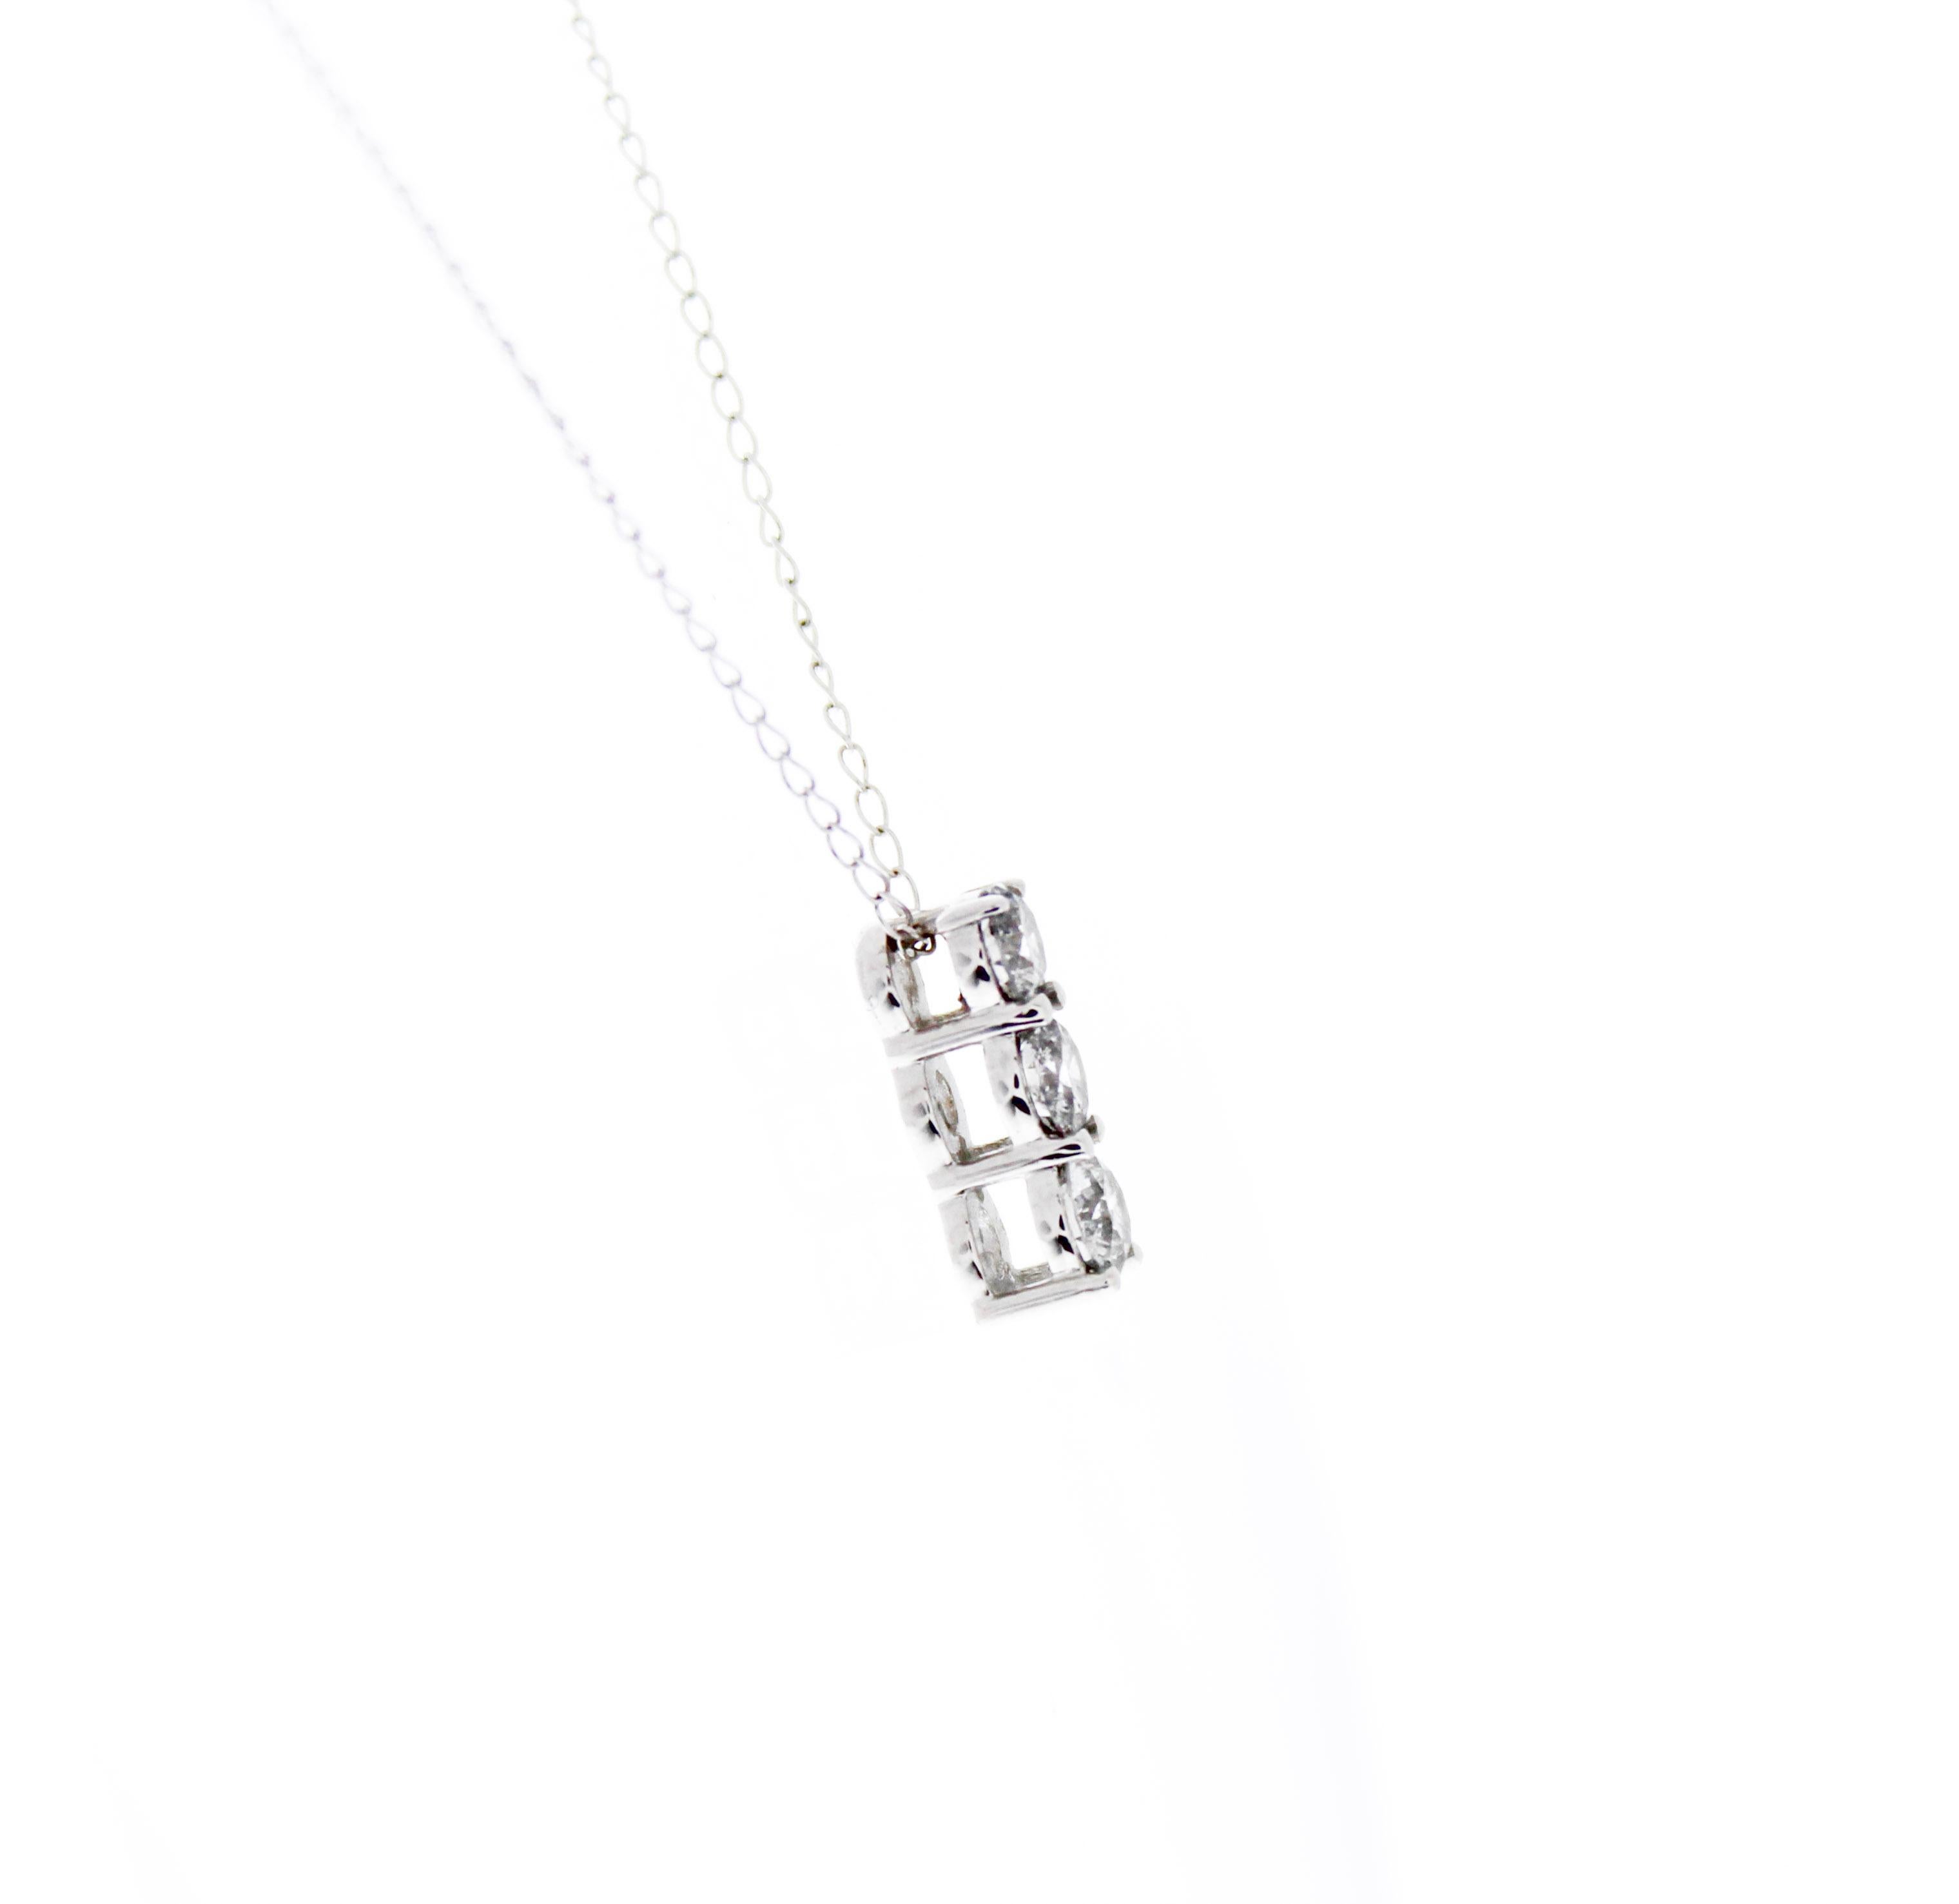 This impressive three-stone round diamond pendant is finely crafted in brightly polished 14 karat white gold and features three stones totaling a carat weight of 0.75CTW. These diamonds are I1 clarity. Ideal as an anniversary or birthday present,